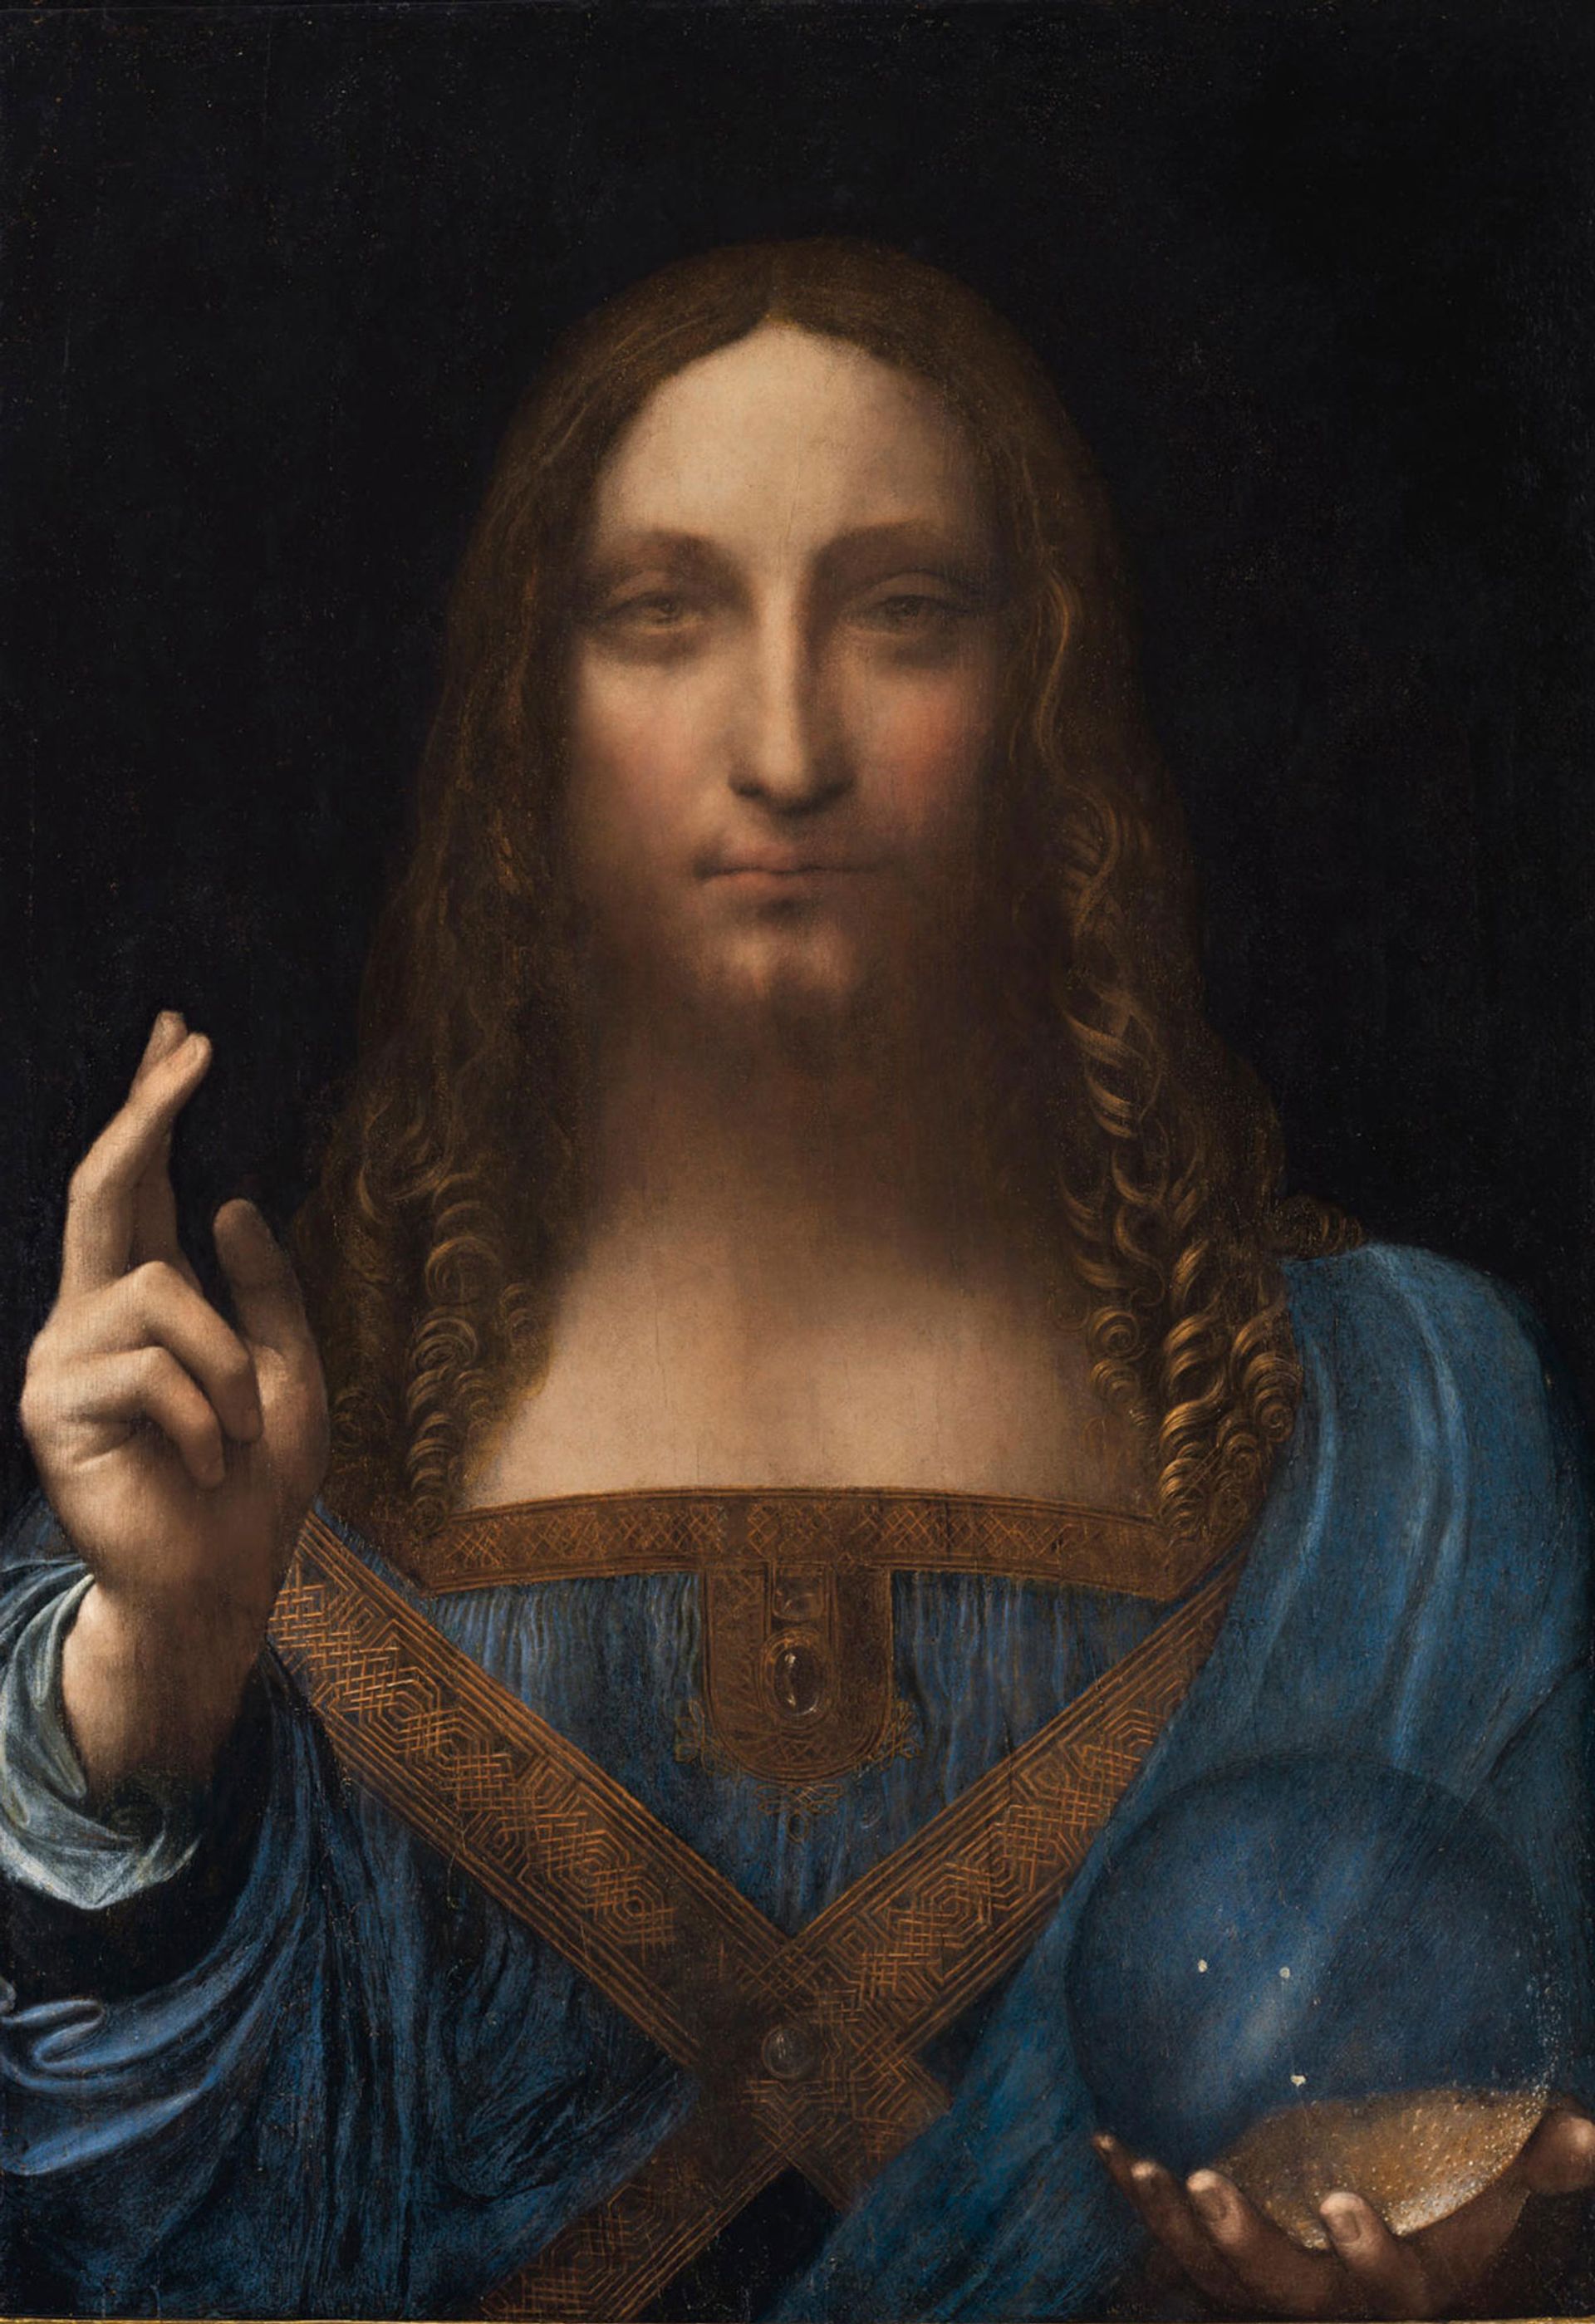 The Salvator Mundi, attributed to Leonardo da Vinci and/or associates; formerly in the Cook collection, currently in the collection of Mohammed bin Salman Al Saud (MBS), Crown Prince of Saudi Arabia. (Sometimes called the Cook Salvator Mundi.)  Image is public domain sourced / access rights from The Picture Art Collection / Alamy Stock Photo